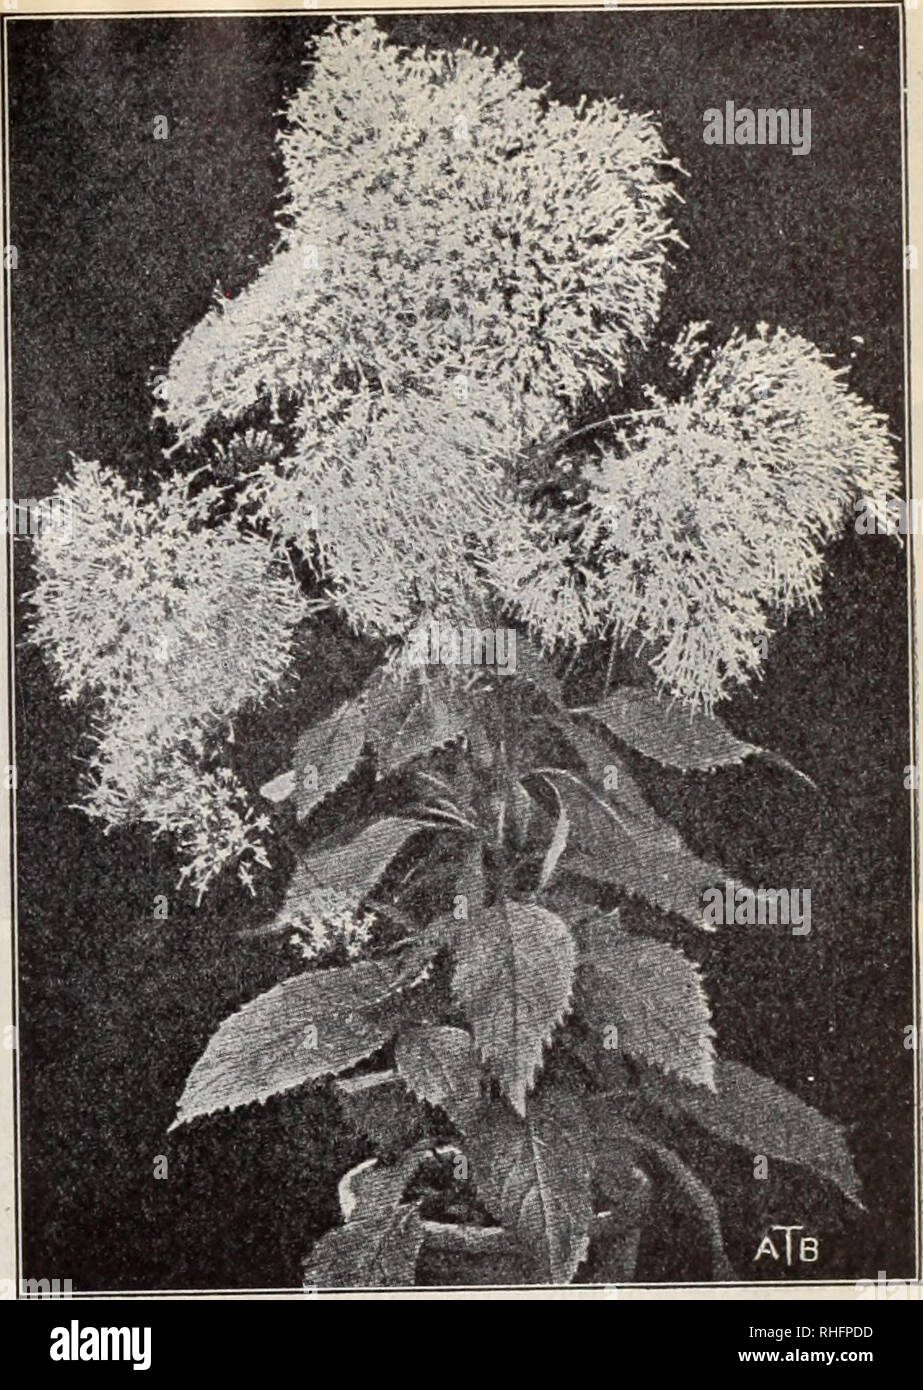 . Boddington's quality bulbs, seeds and plants / Arthur T. Boddington.. Nursery Catalogue. Uoaaingtou'B Quality Zinnias (See page 58) Trachelium caeruleum VERBASCUM (Mullein). H.P. Pkt. Blattaria alba giganteum. 4 ft. White. July to Sept So 501 Libani. 4 ft. Yellow. July to September 10 Olympicum. 6 ft. Yellow. July to September lo Phoeniceum. ij^ft. Purple. May and June 05 VINCA. The Annual Periwinkle from Madagascar. T.P. Useful for conservatories or bedding. Pkt. Oz. Alba. White $0 10 $1 00 Rosea. Rose 10 i 00 &quot; alba. Rose and white 10 1 00 Mixed 10 75 VIRGINIA STOCKS. H.A. Sweet-scent Stock Photo